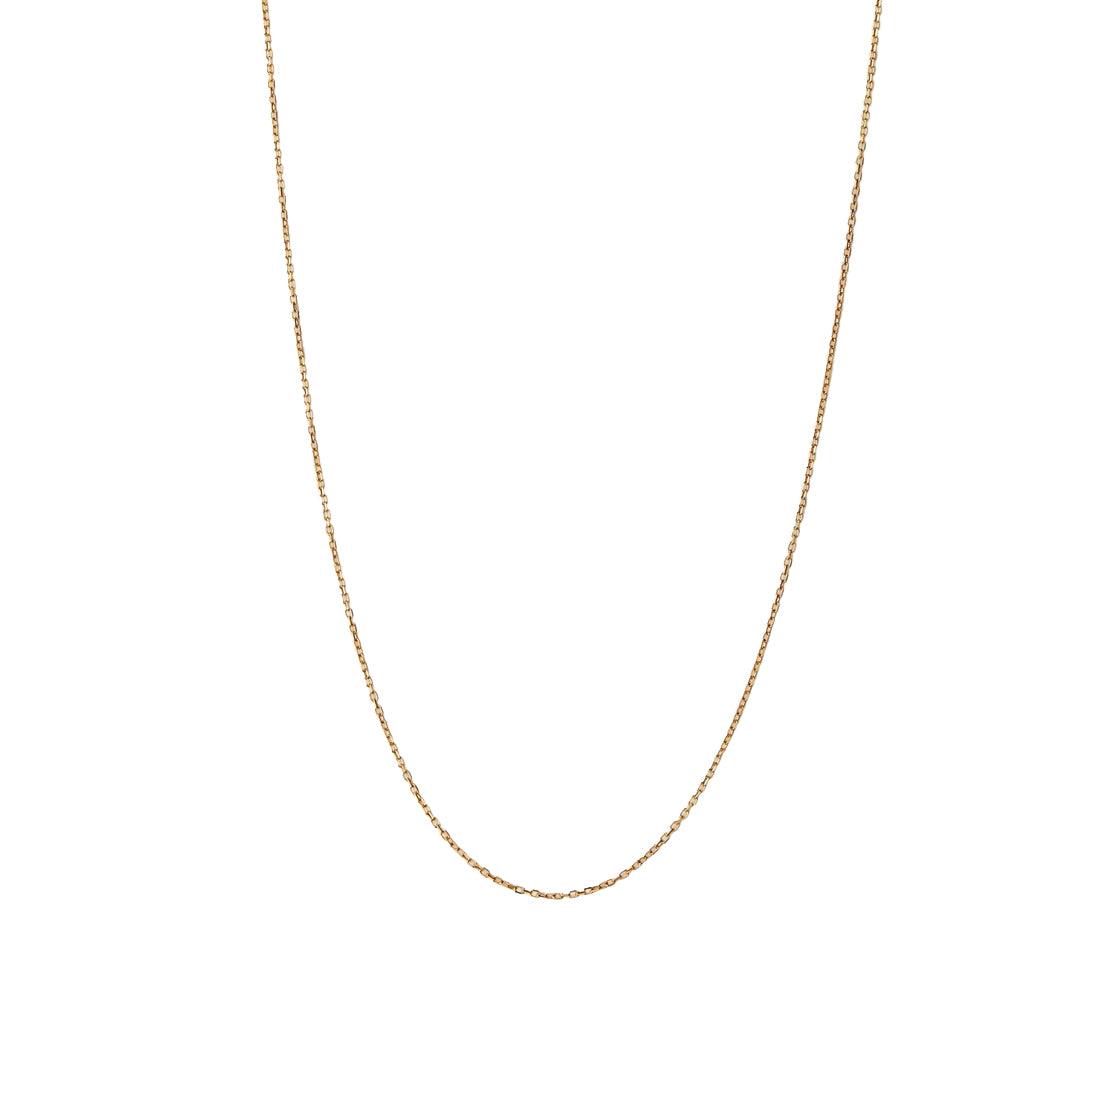 Delicate Sweet Gold-Filled Chain - Tippy Taste Jewelry